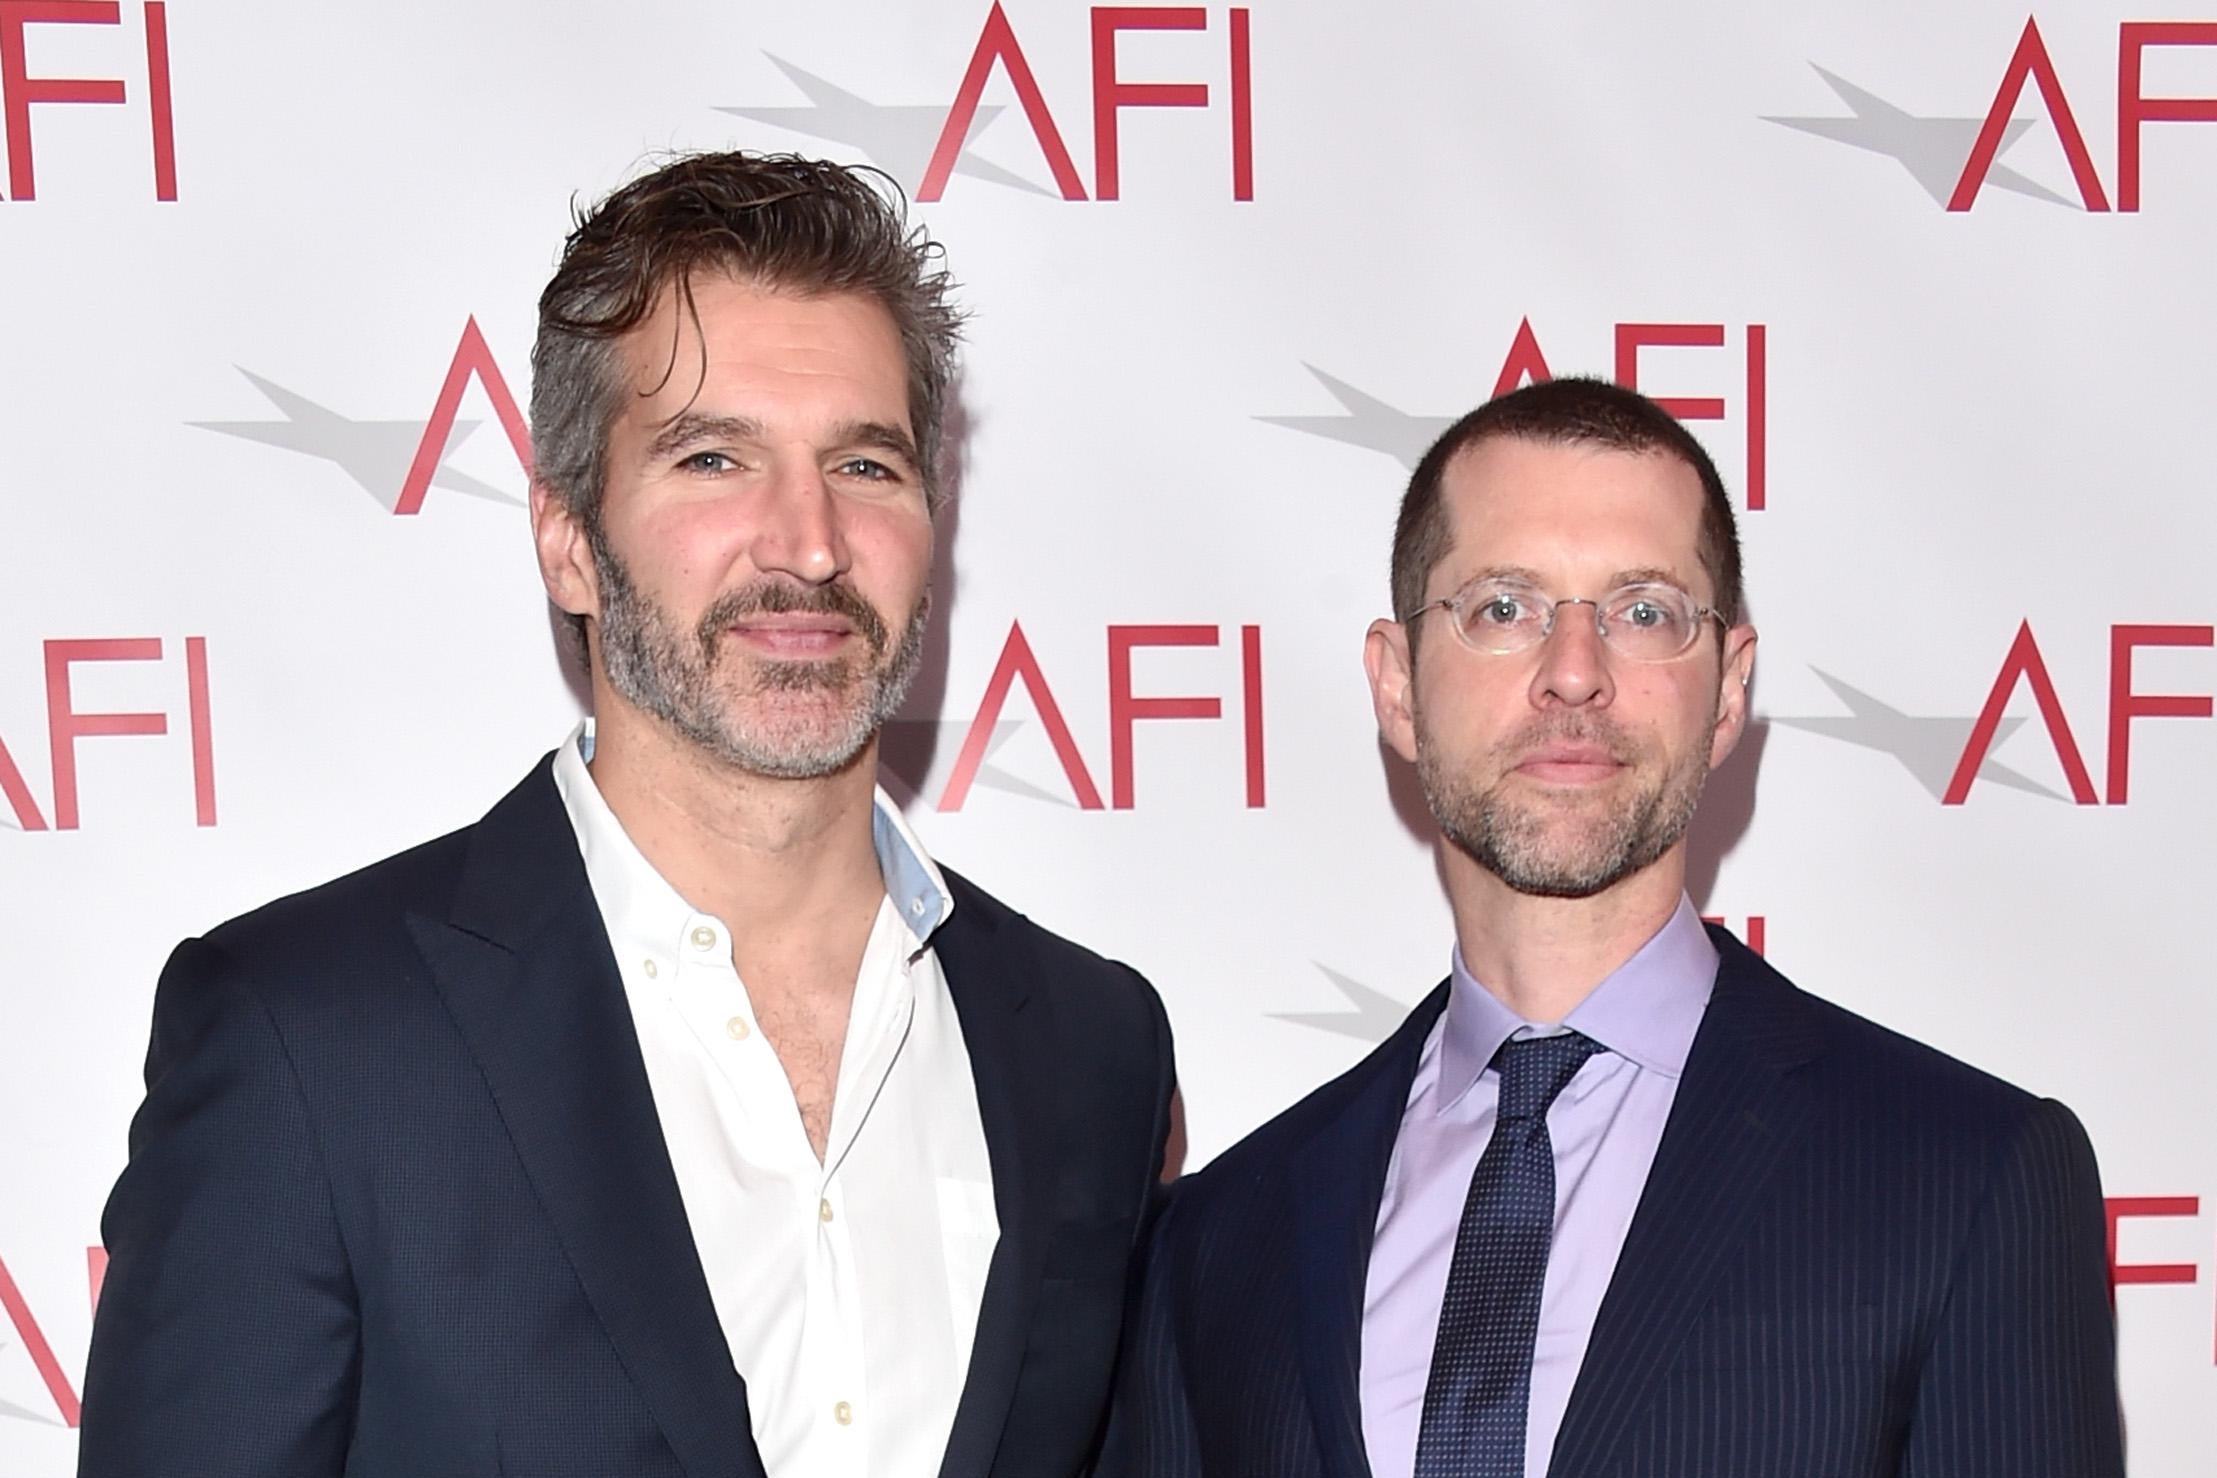 Benioff and Weiss on the red carpet.